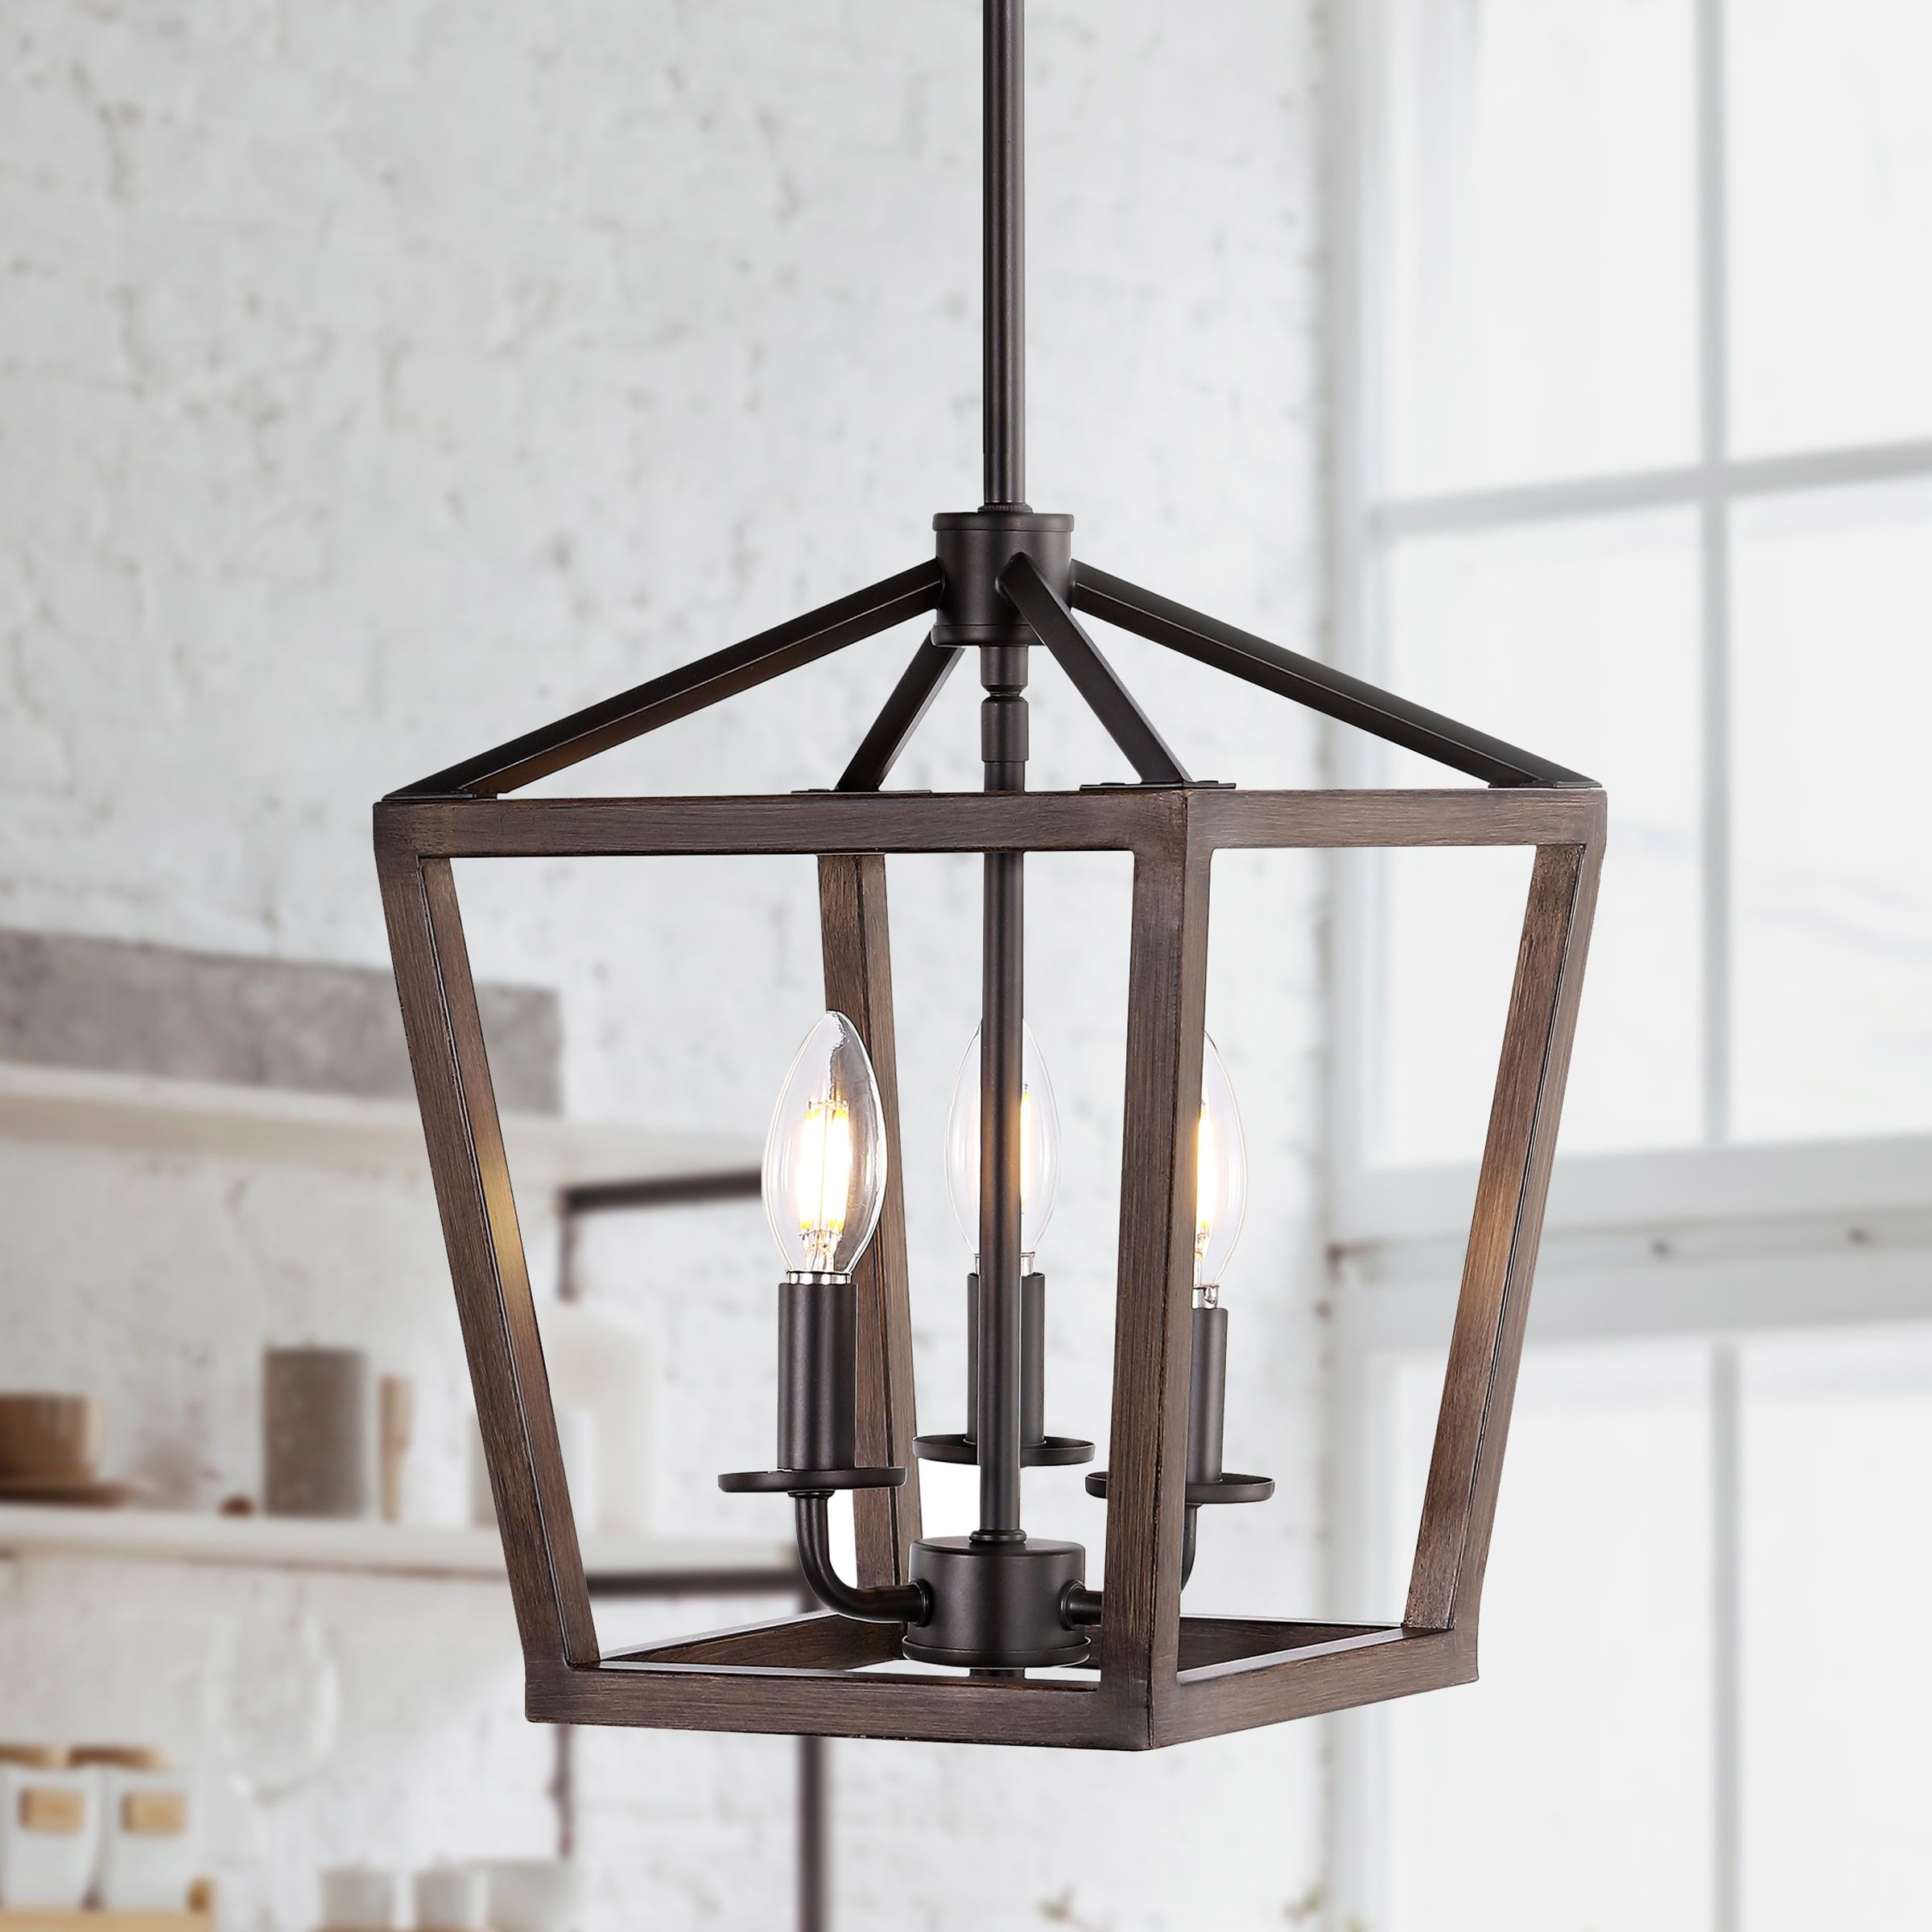 Jonathan Y Oria Industrial Rustic 3 Light Oil Rubbed Bronze Farmhouse  Lantern Led Pendant Light In The Pendant Lighting Department At Lowes Inside Bronze Lantern Chandeliers (View 12 of 15)